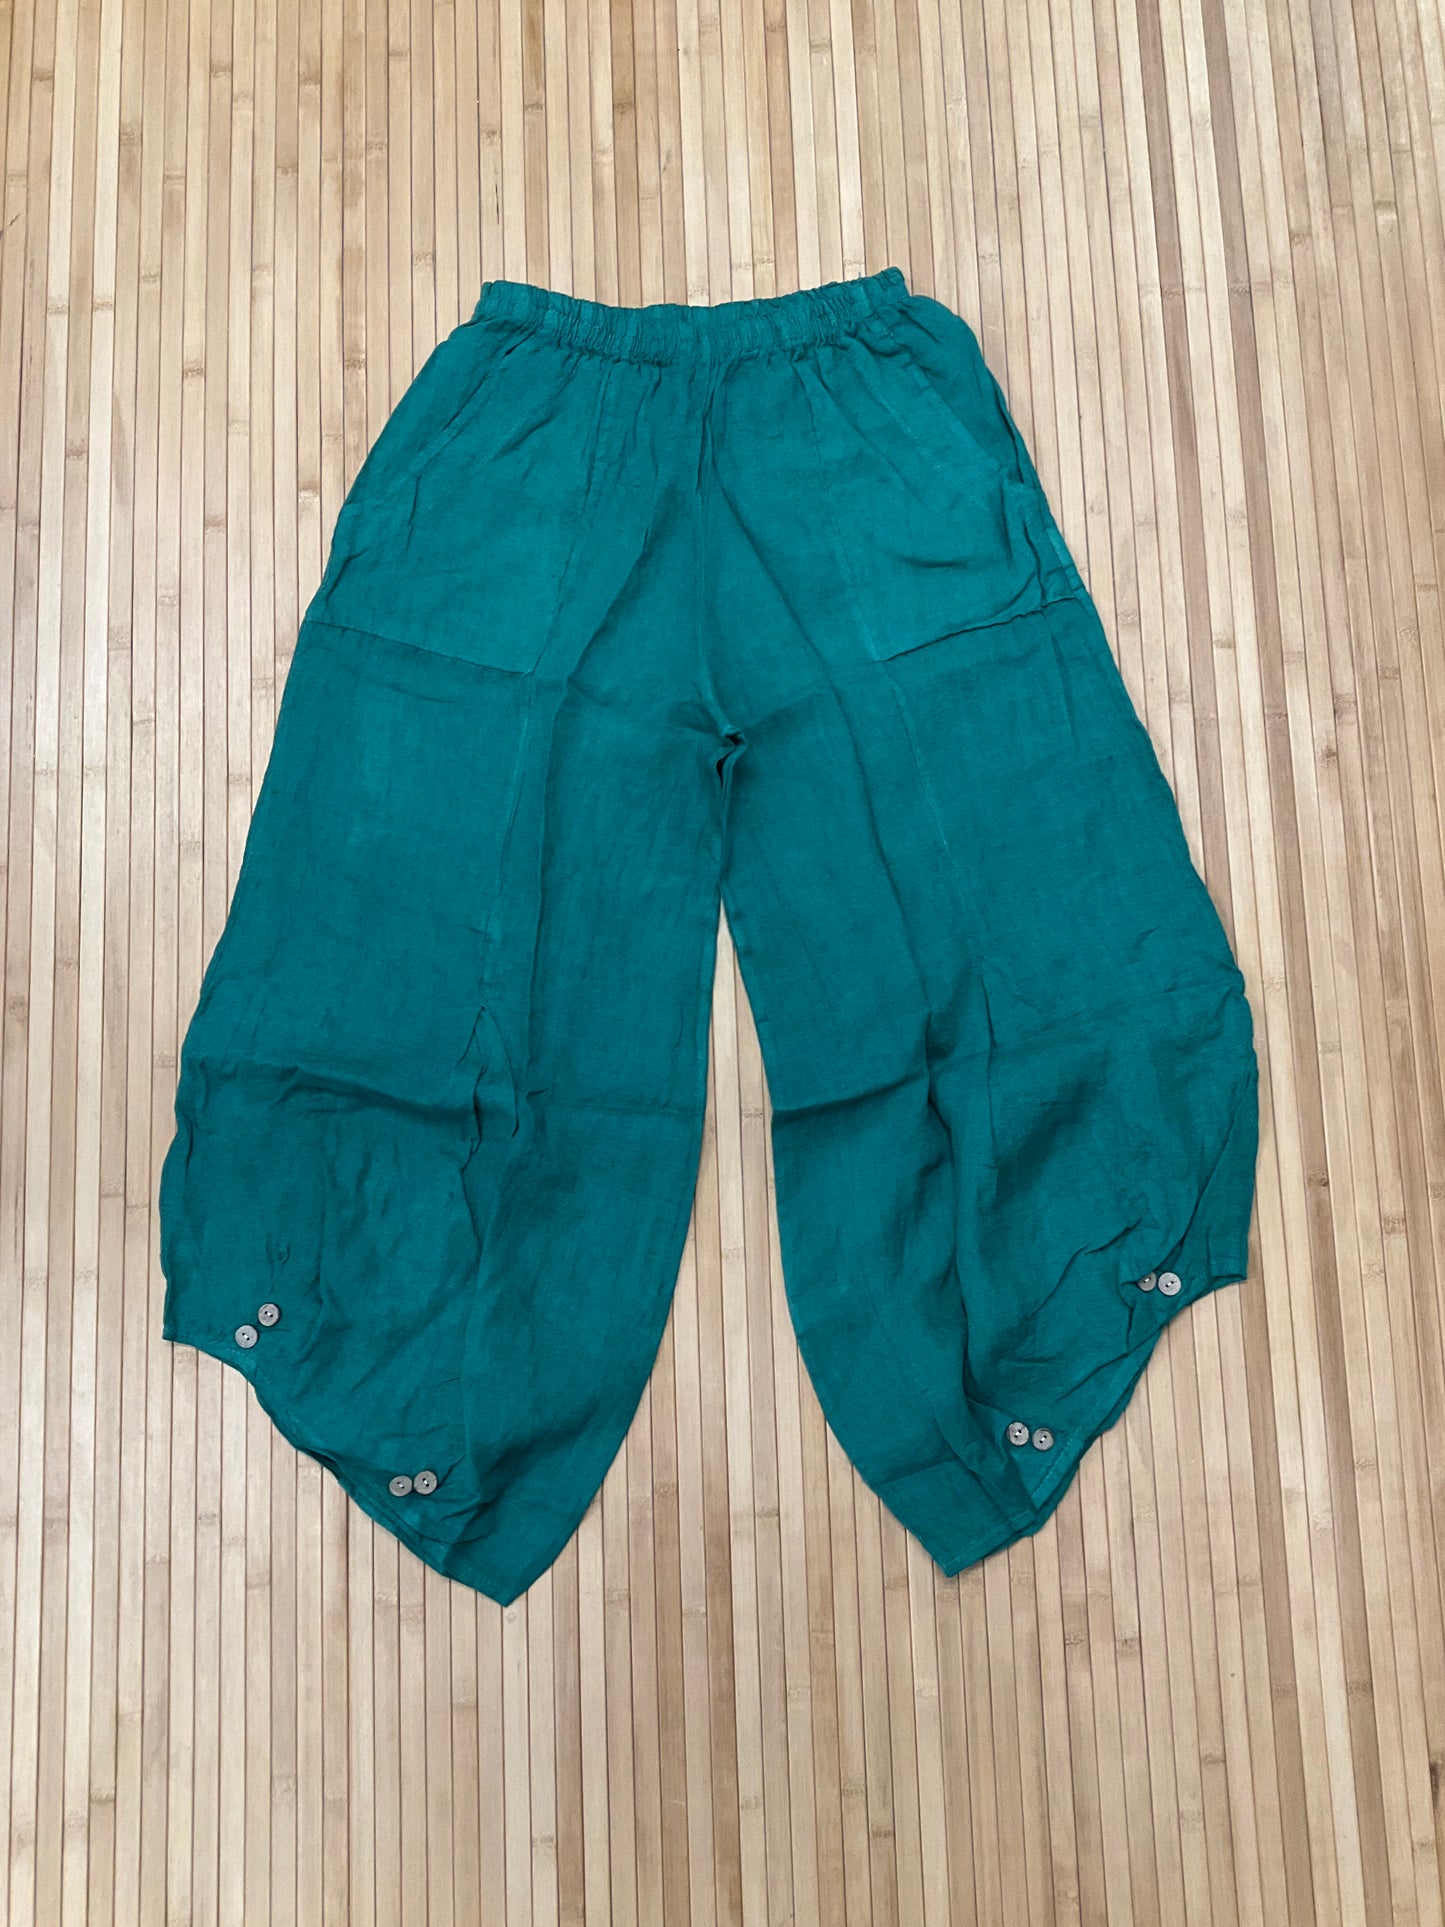 Italian, Linen Pants with button accent.